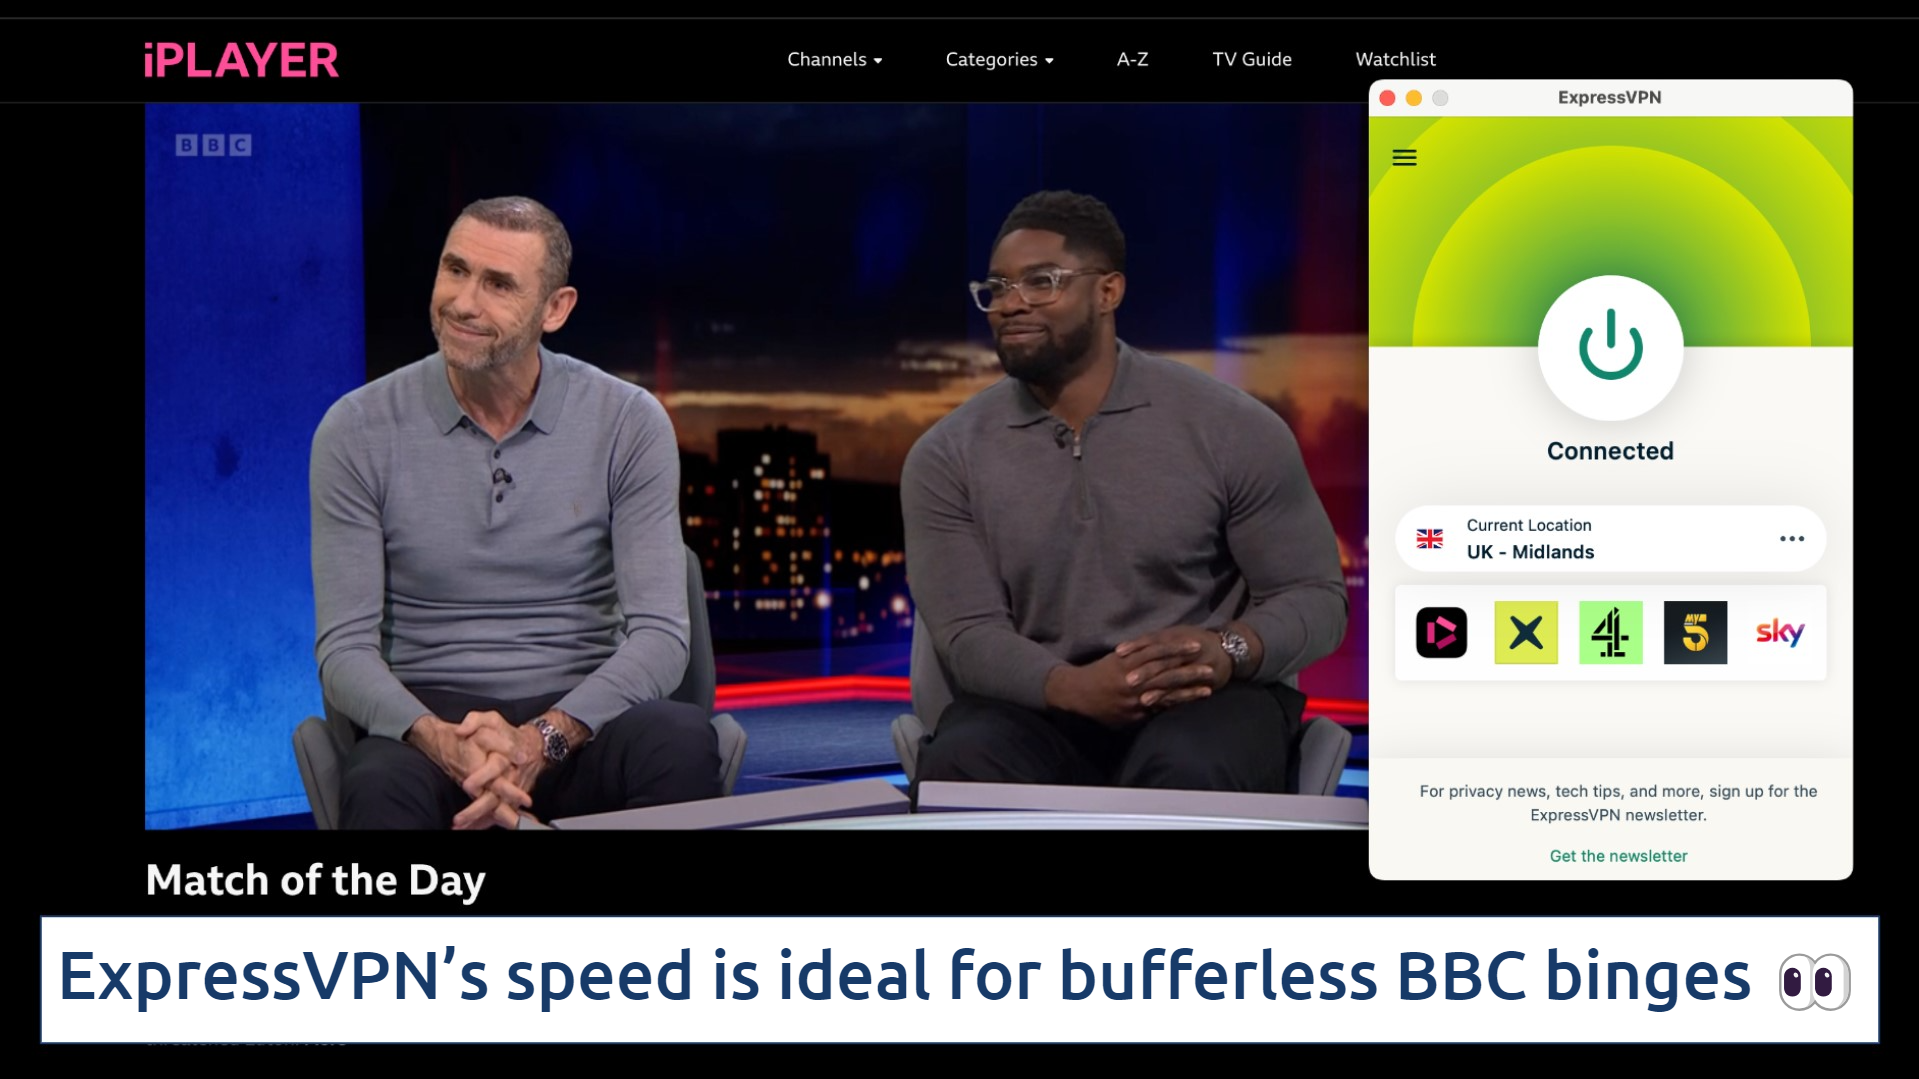 Screenshot of the ExpressVPN app over the iPlayer streaming Match of the Day